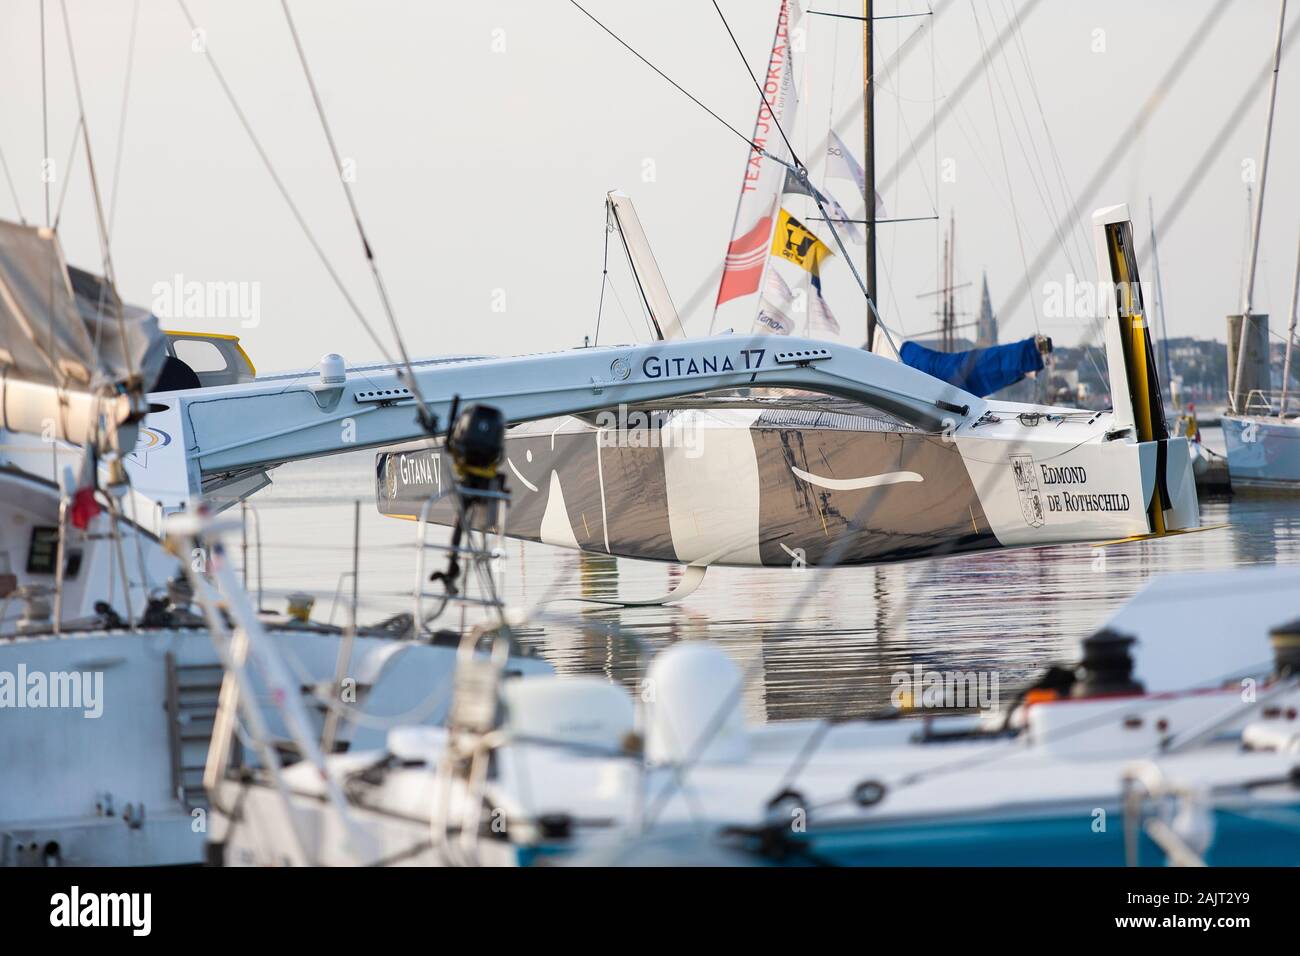 Gitana 17, a purpose built record breaking maxi multihull yacht at rest in its berth in Lorient, Western France. Sponsored by Edmond de Rothschild. Stock Photo